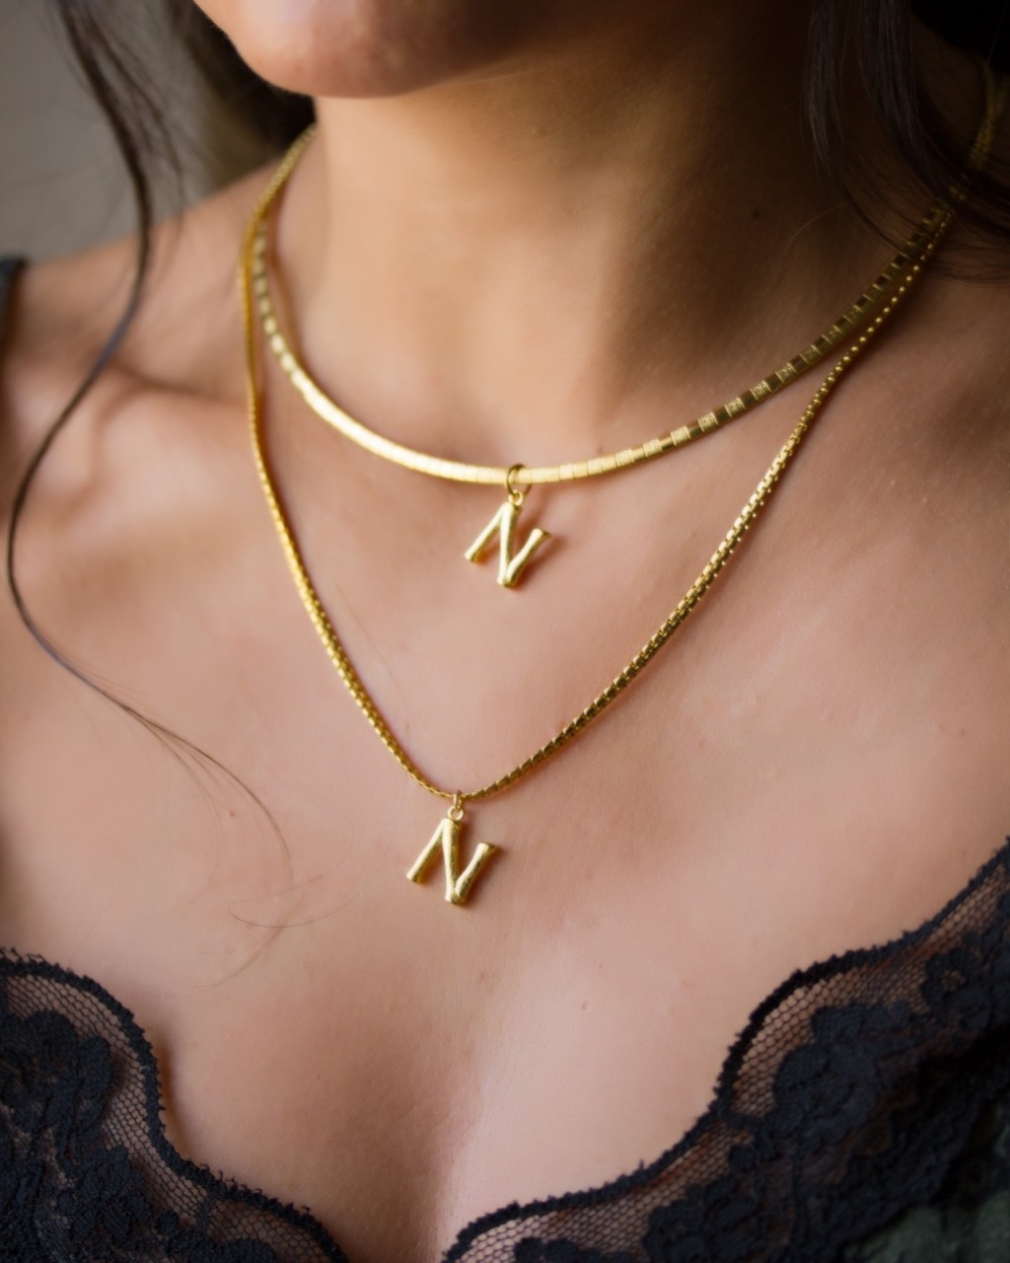 Best Two Initial Necklace Ideas You